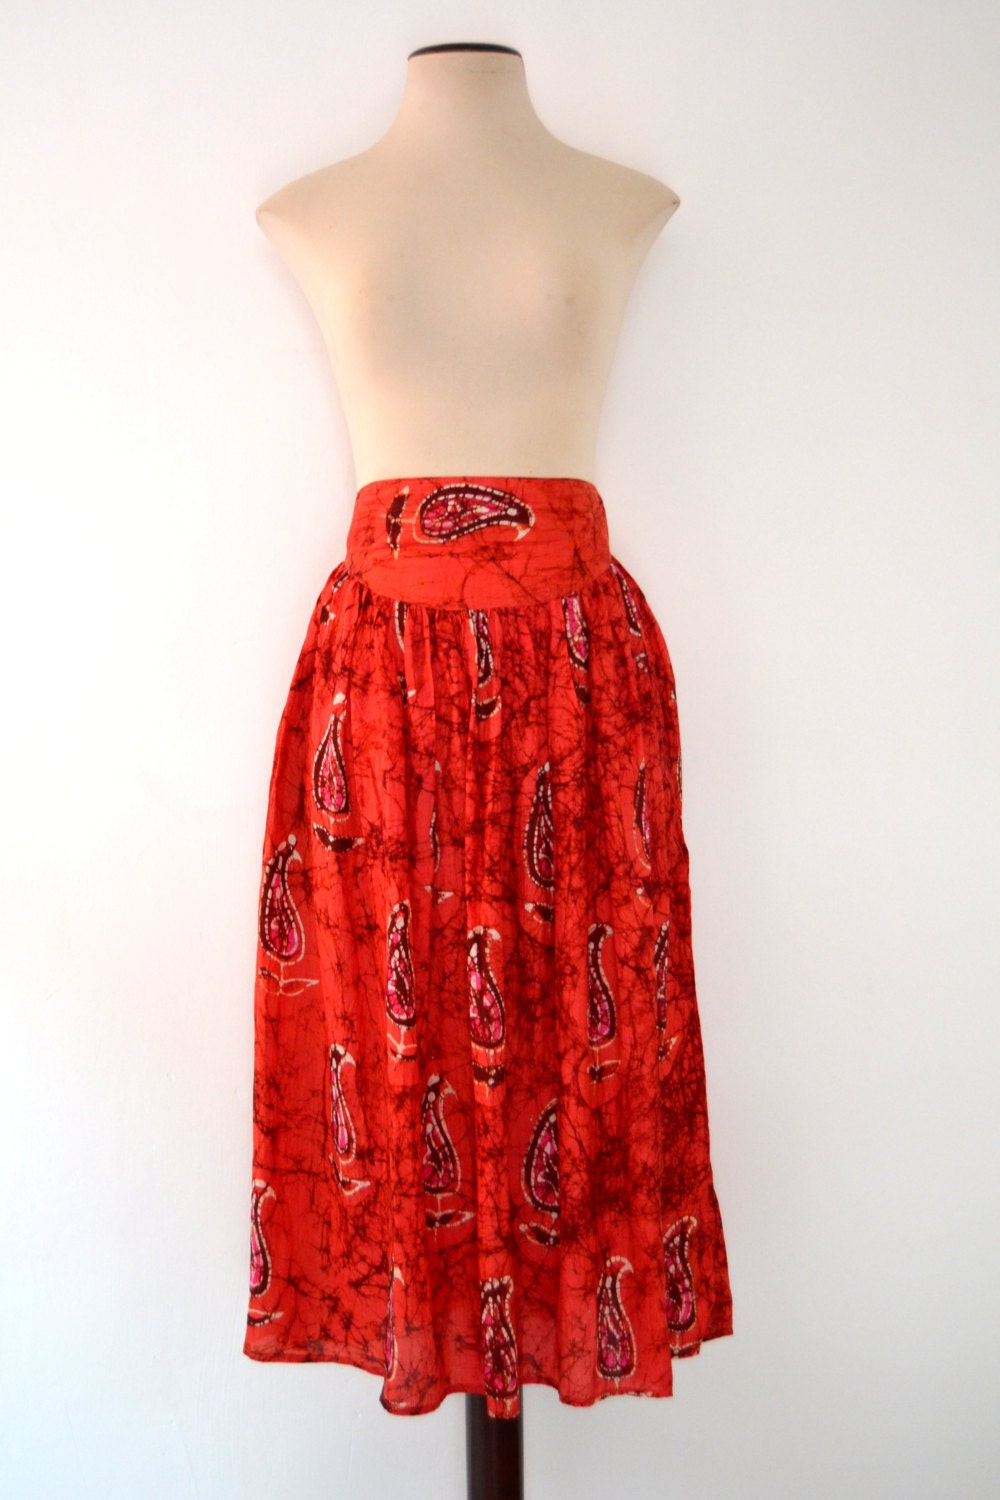 Beautiful Tie Dyed Silk Midi Skirt in the Lightest and most